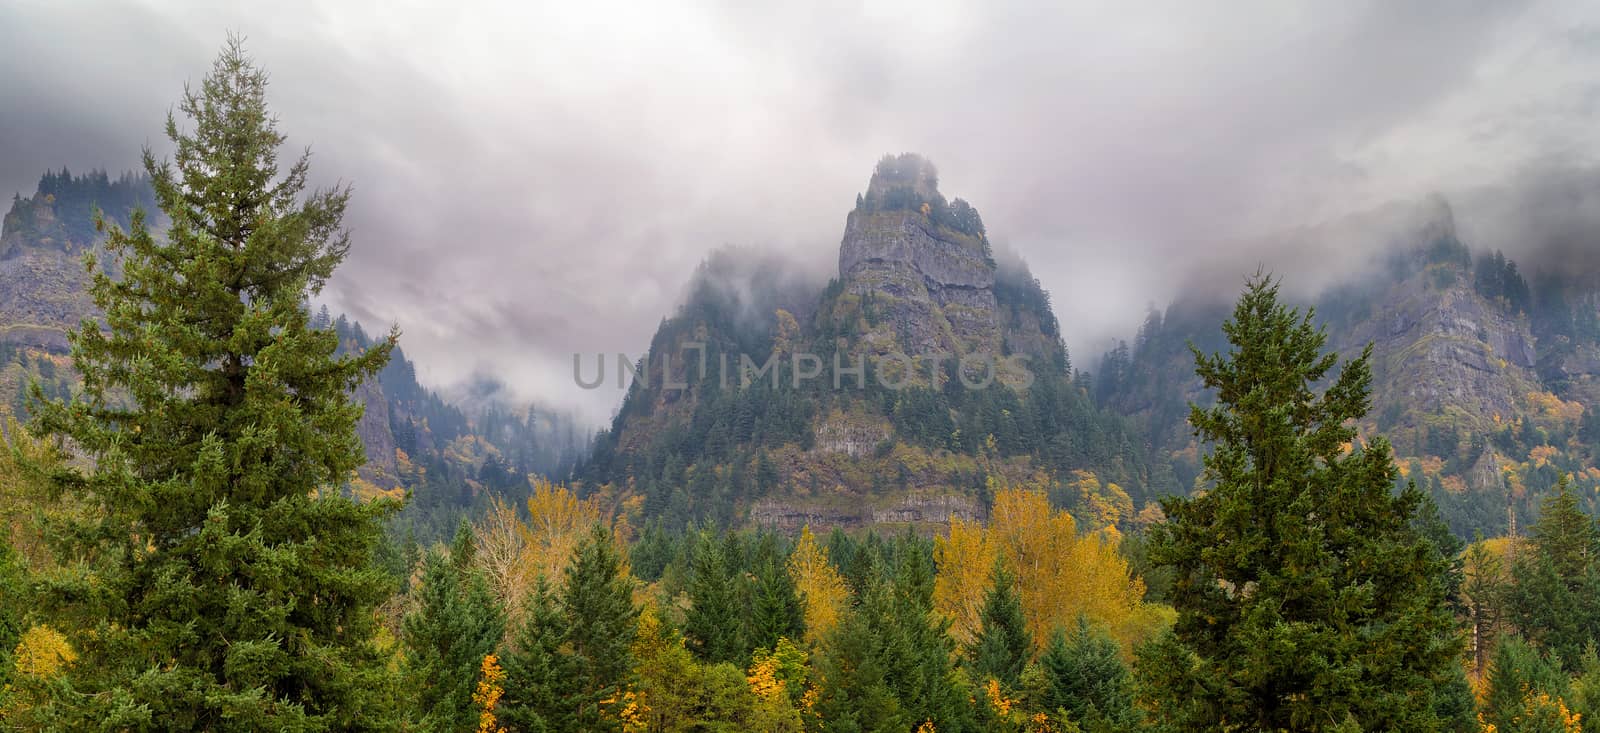 St Peters Dome along Columbia River Gorge on a foggy day in fall season panorama